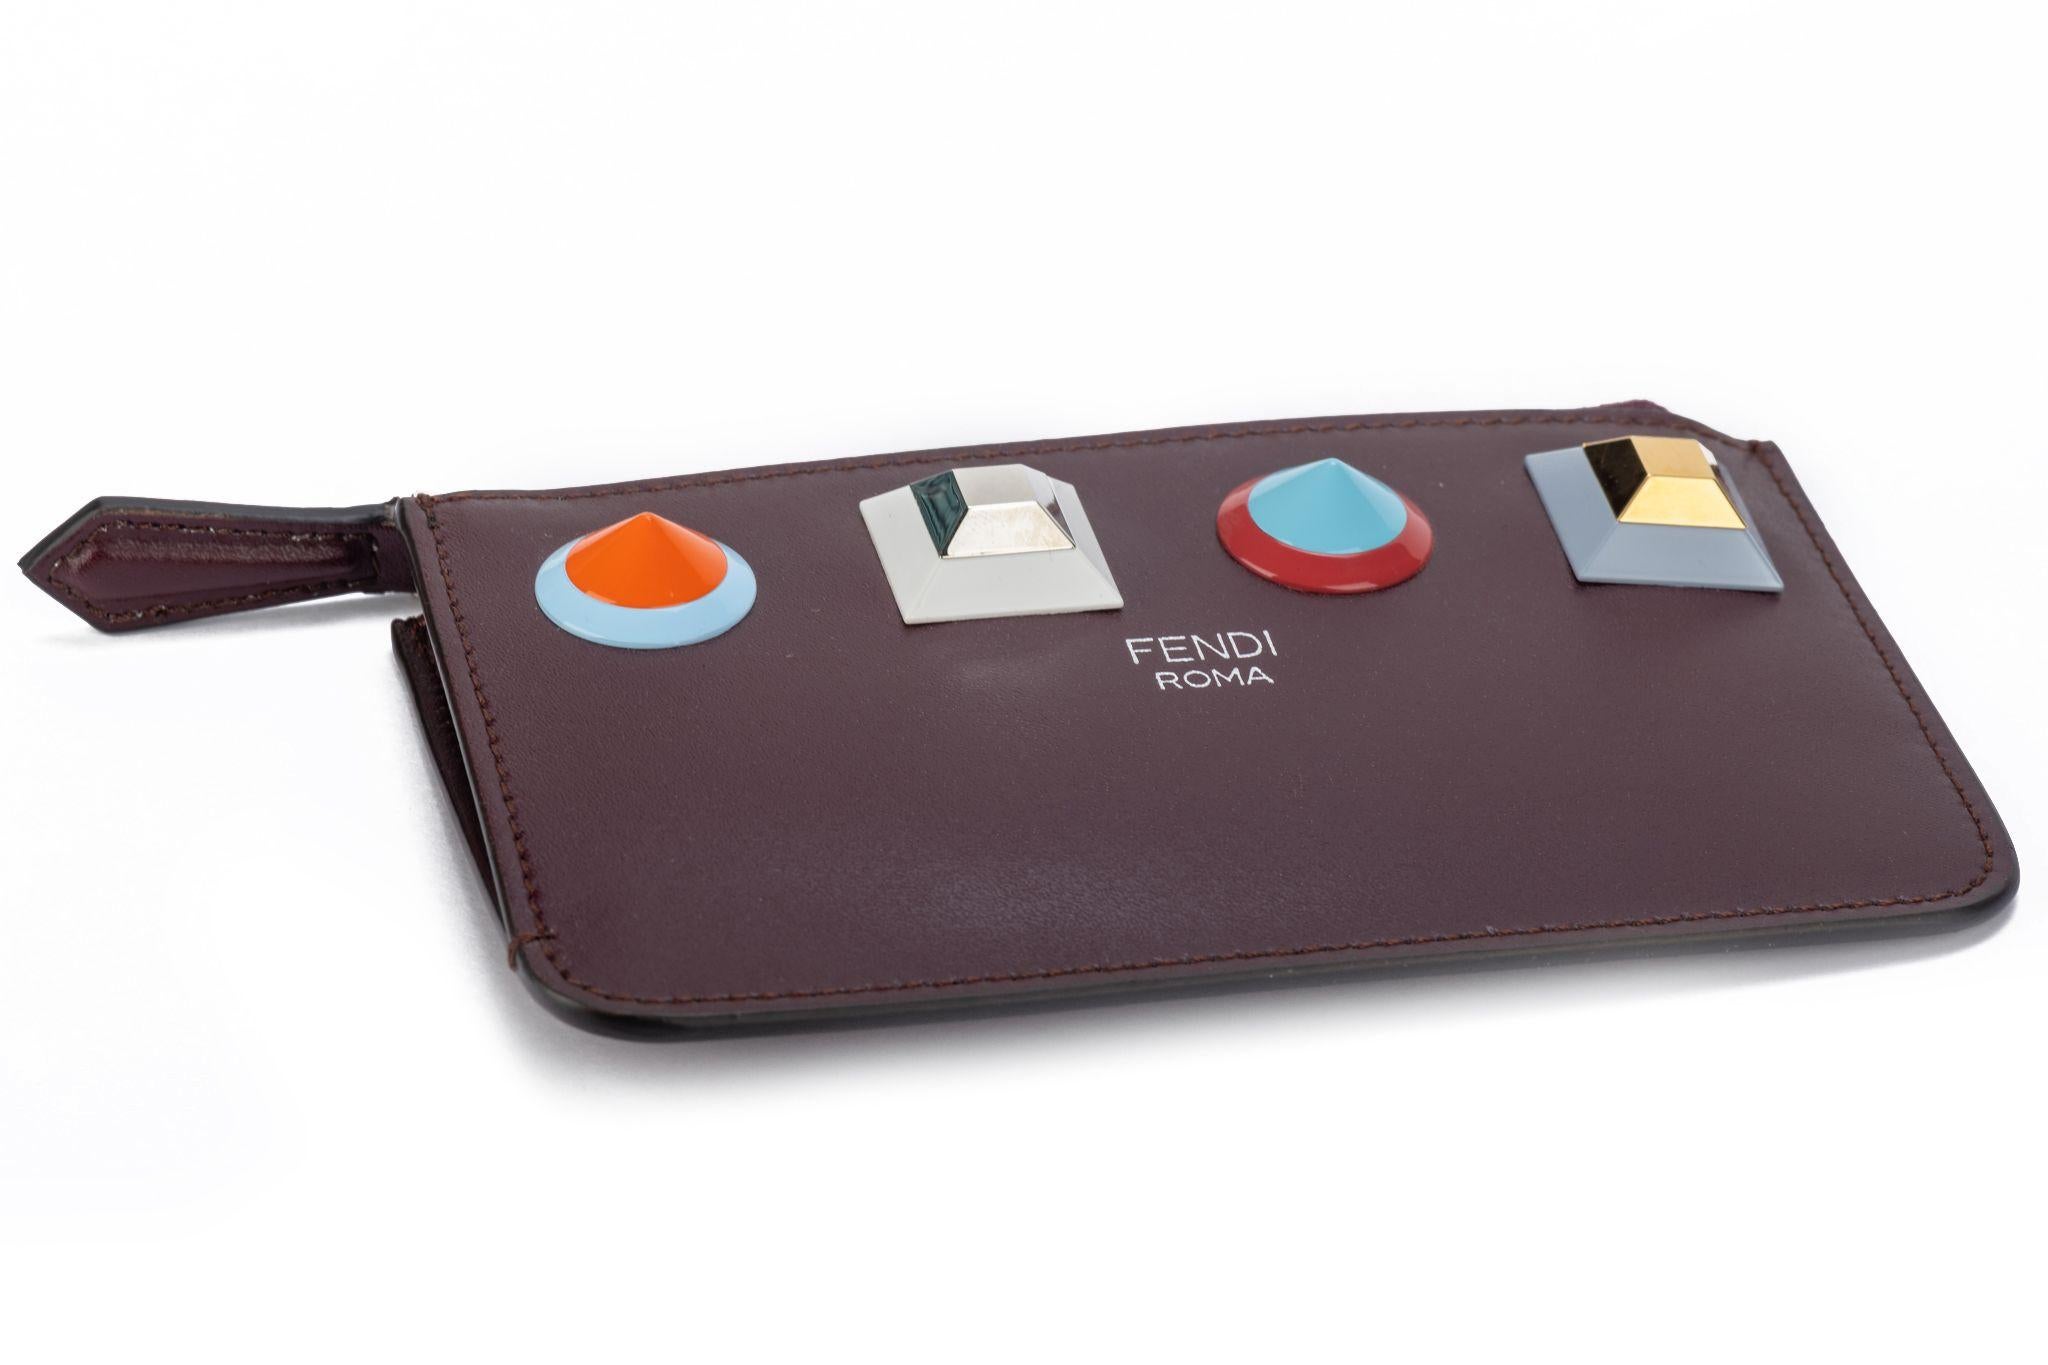 Fendi new burgundy leather key case /zipped wallet with colorful studs .
Box and original dustcover.